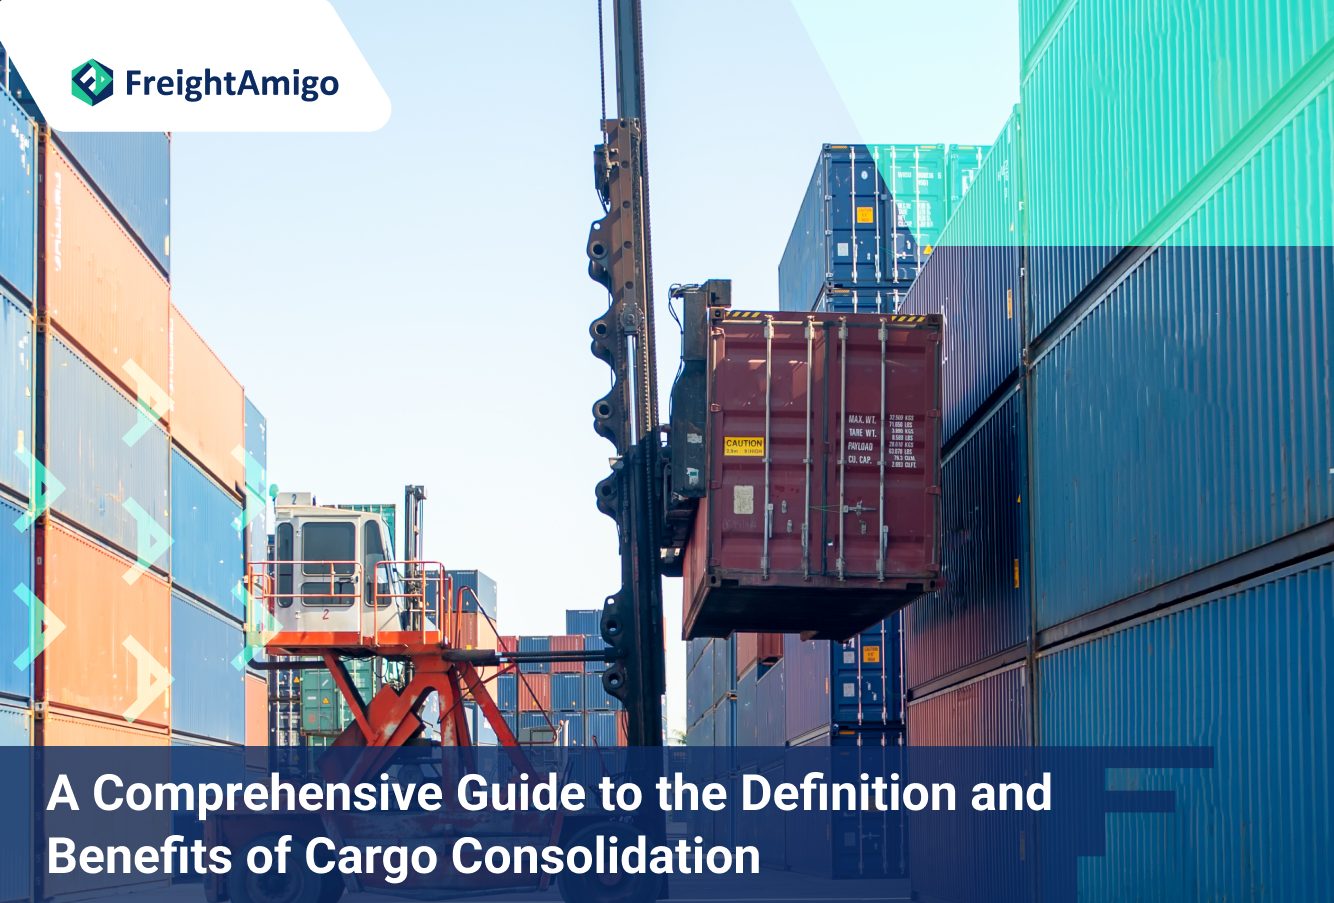 A Comprehensive Guide to the Definition and Benefits of Cargo Consolidation